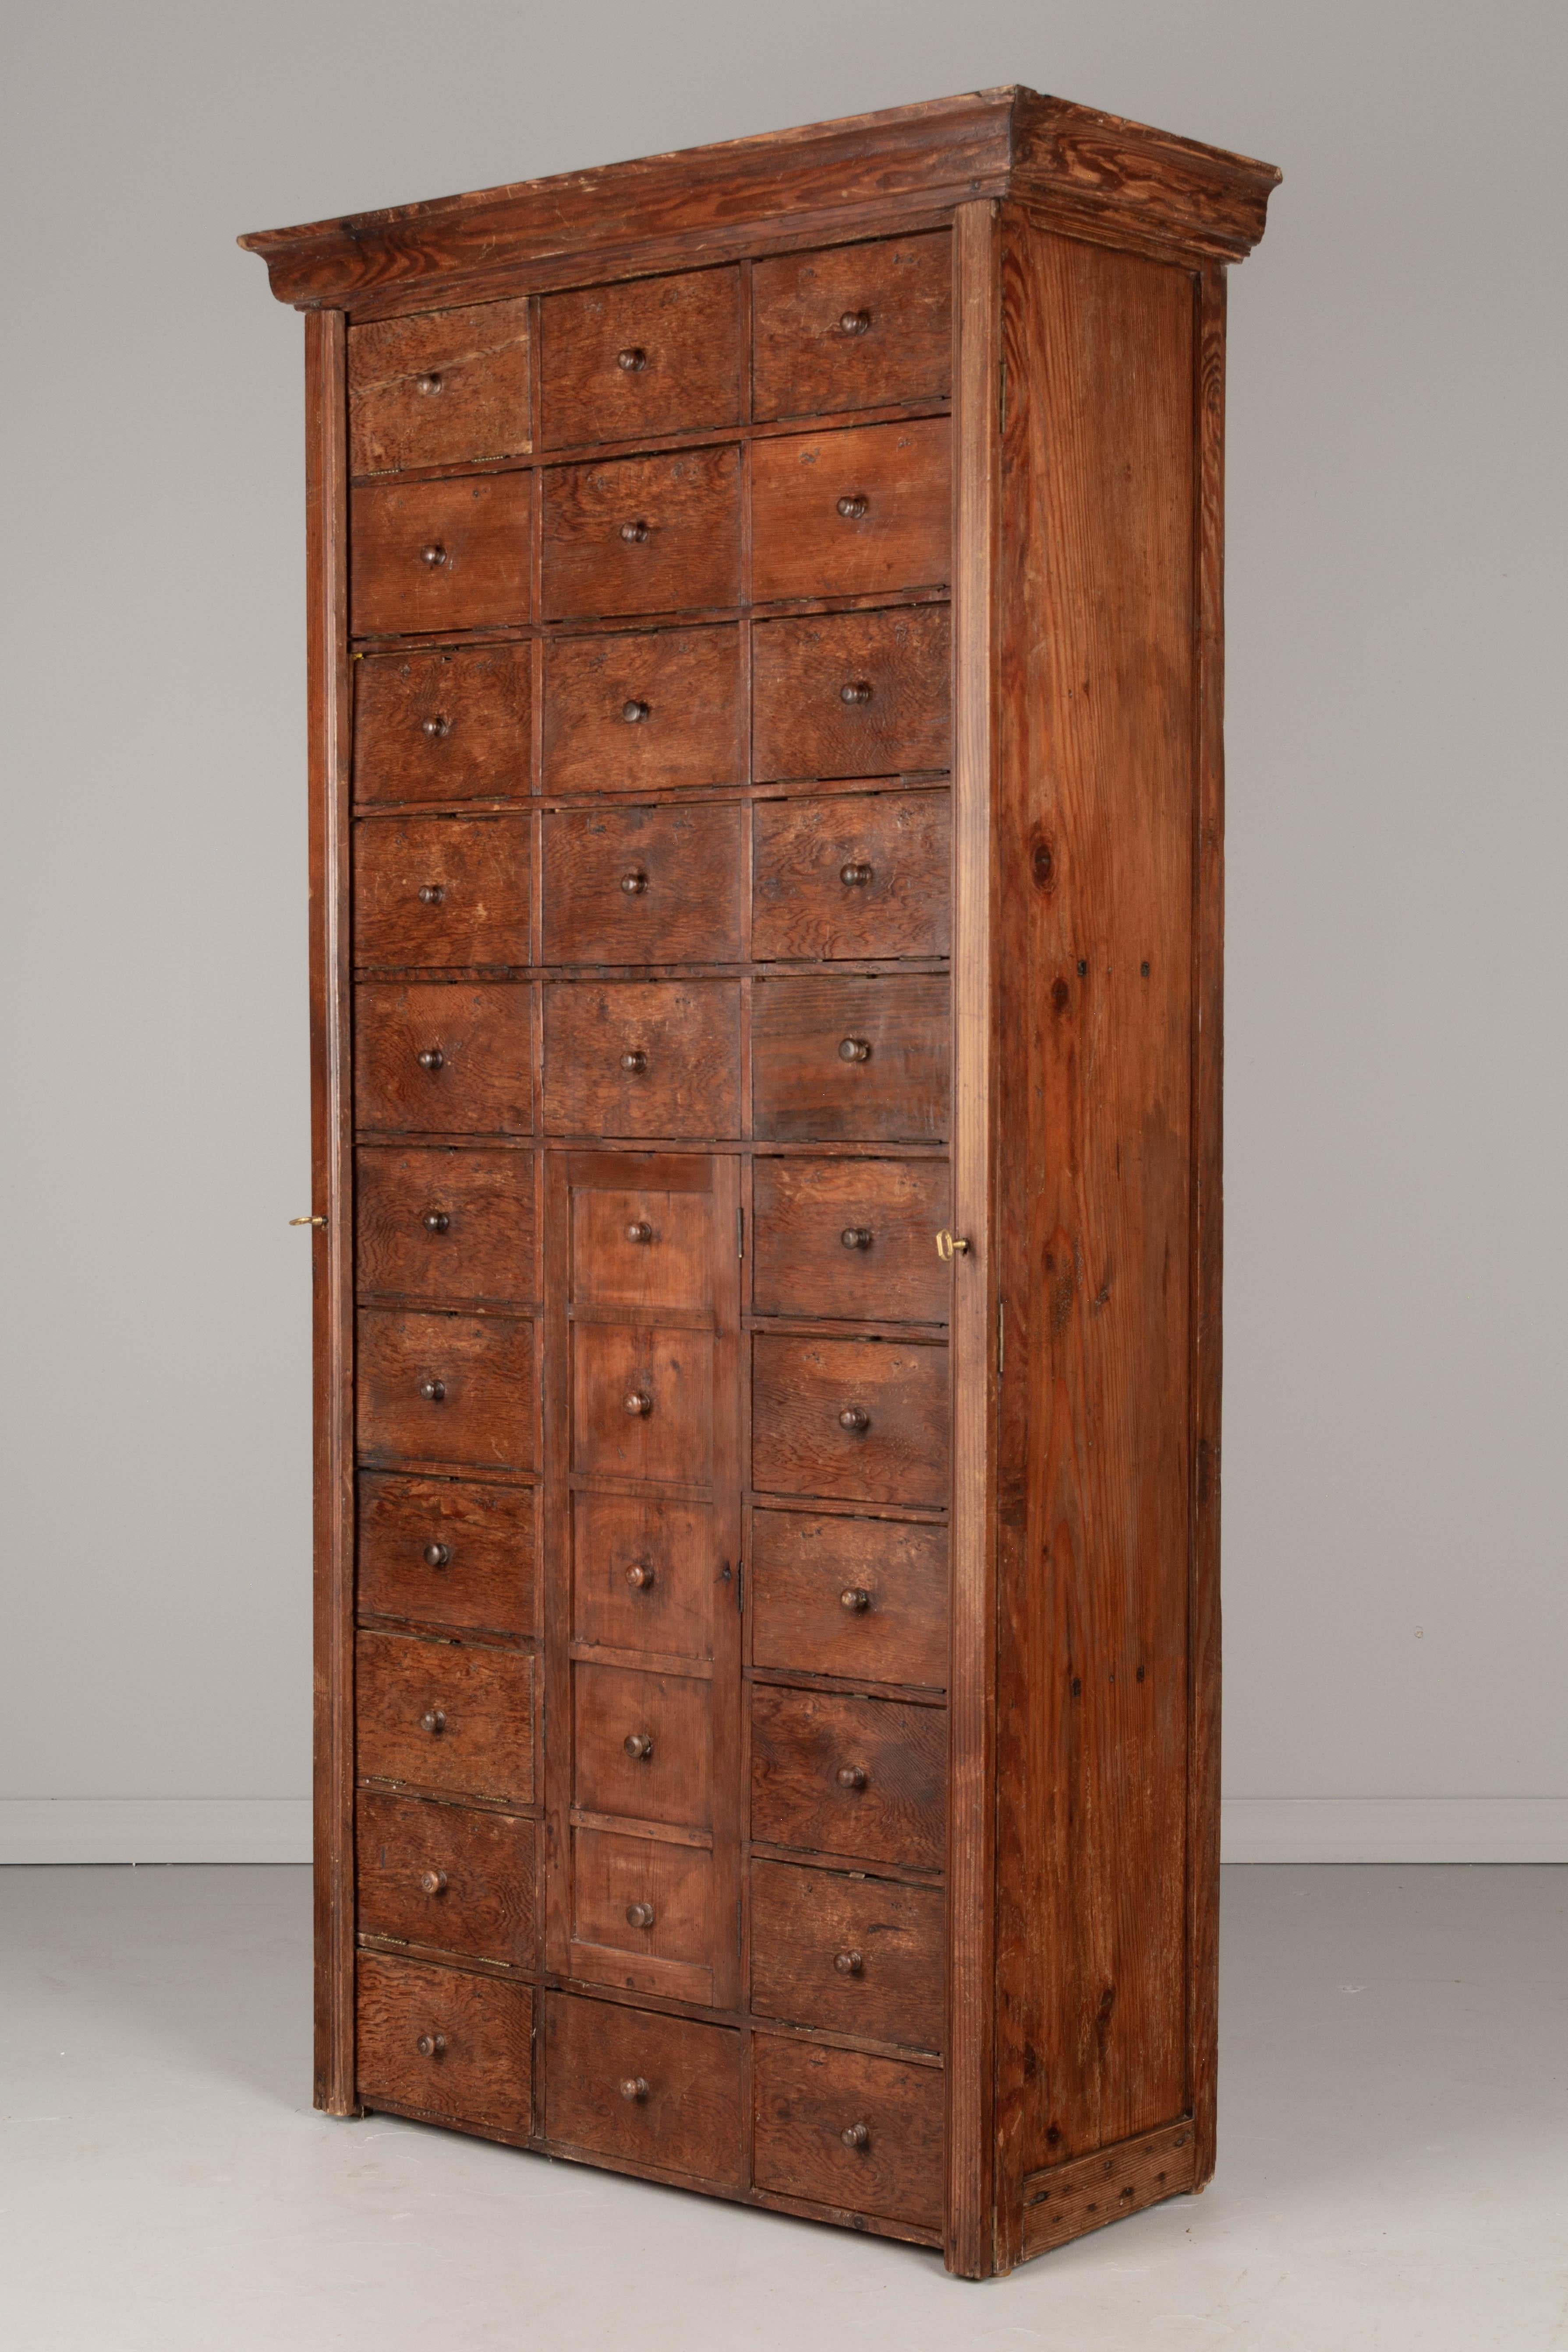 Rustic French Cartonnier, or Cabinet with Compartments In Good Condition For Sale In Winter Park, FL